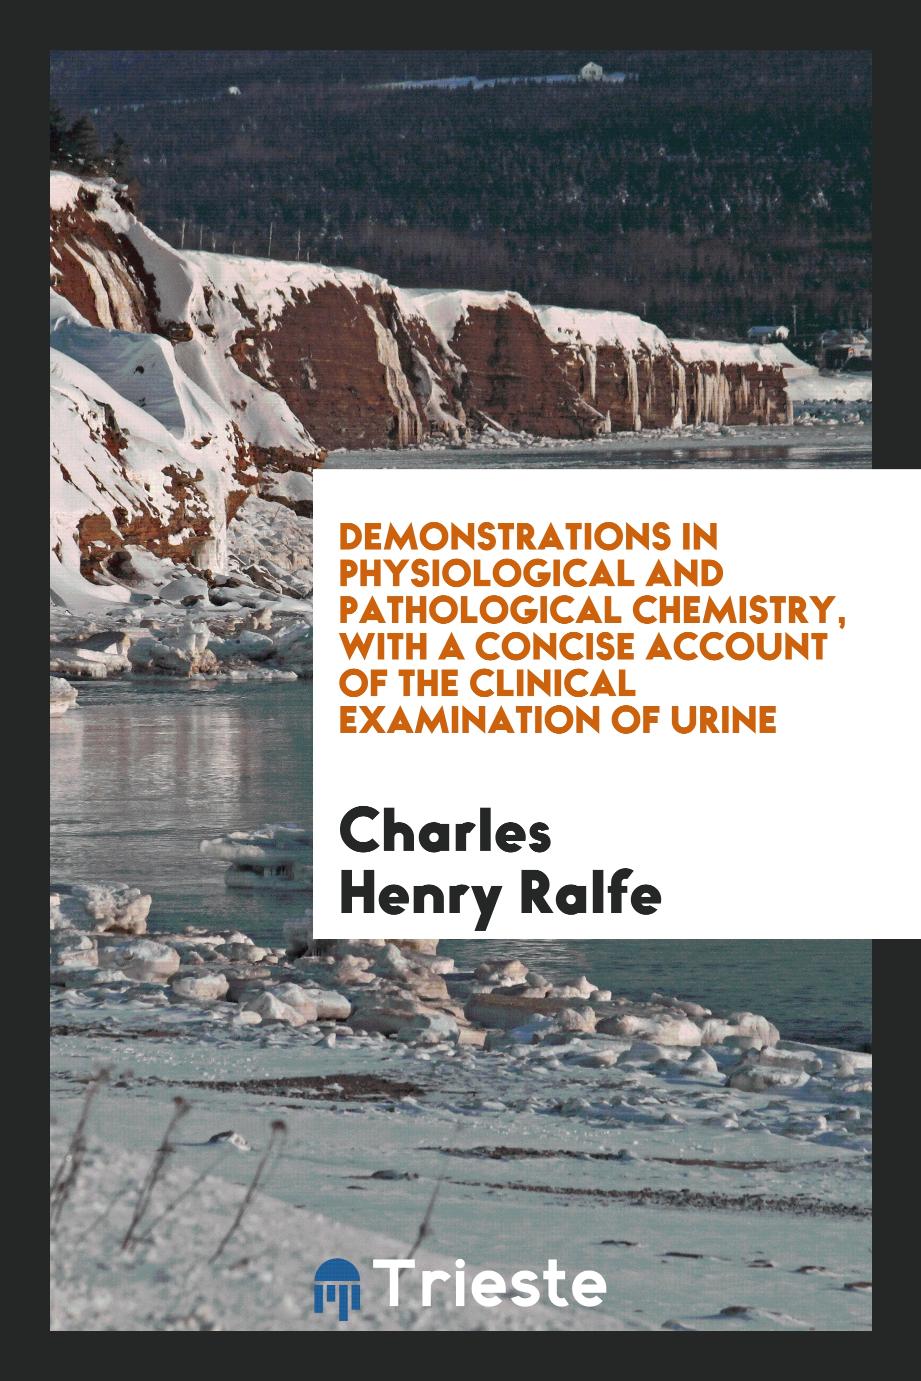 Demonstrations in Physiological and Pathological Chemistry, with a Concise Account of the Clinical Examination of Urine